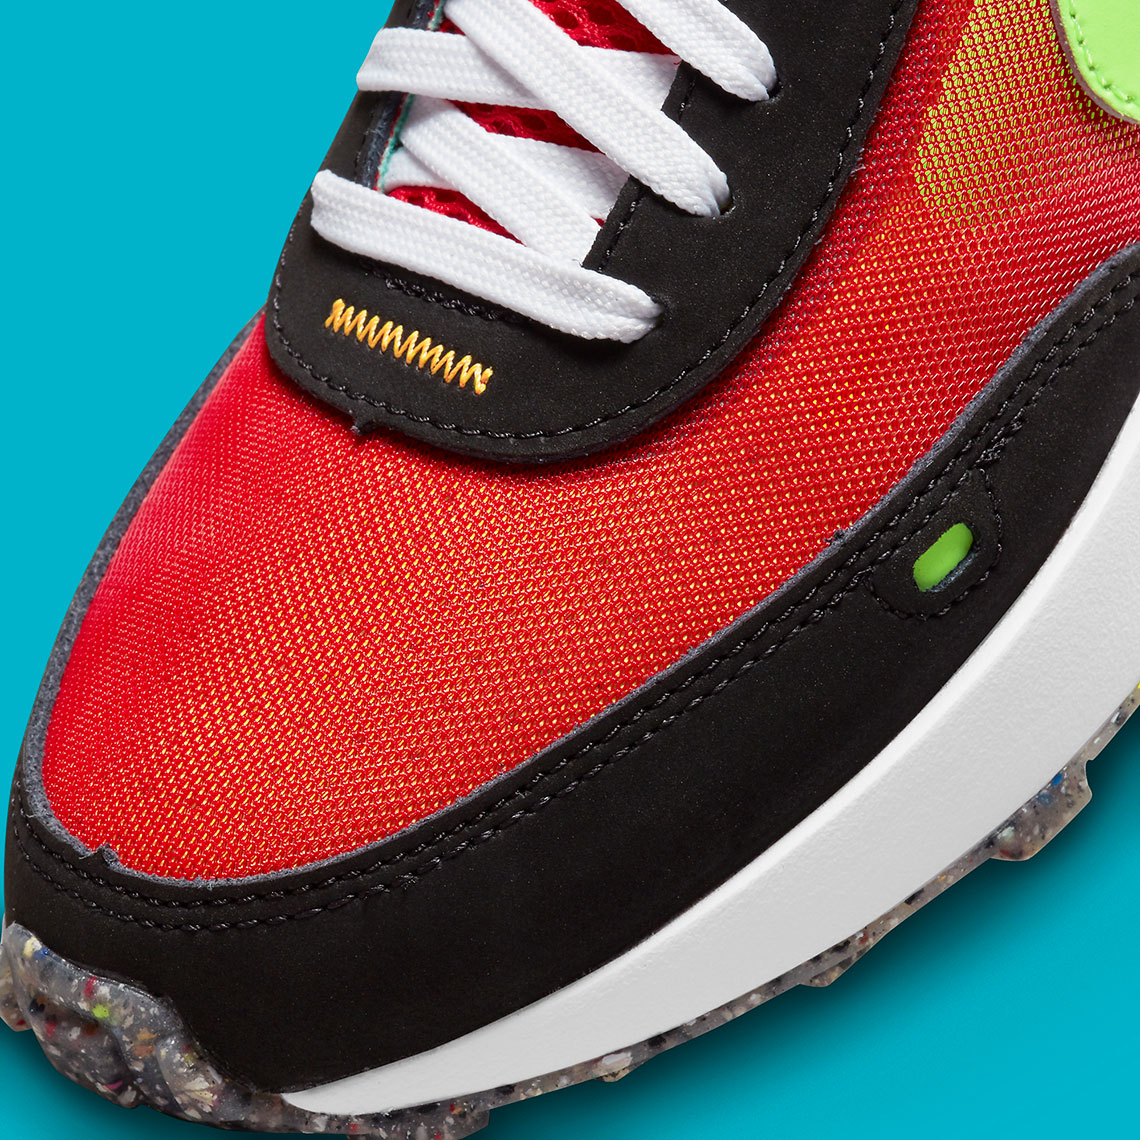 Using elements from the Air Max 90 Red Green Blue Dm8116 600 1